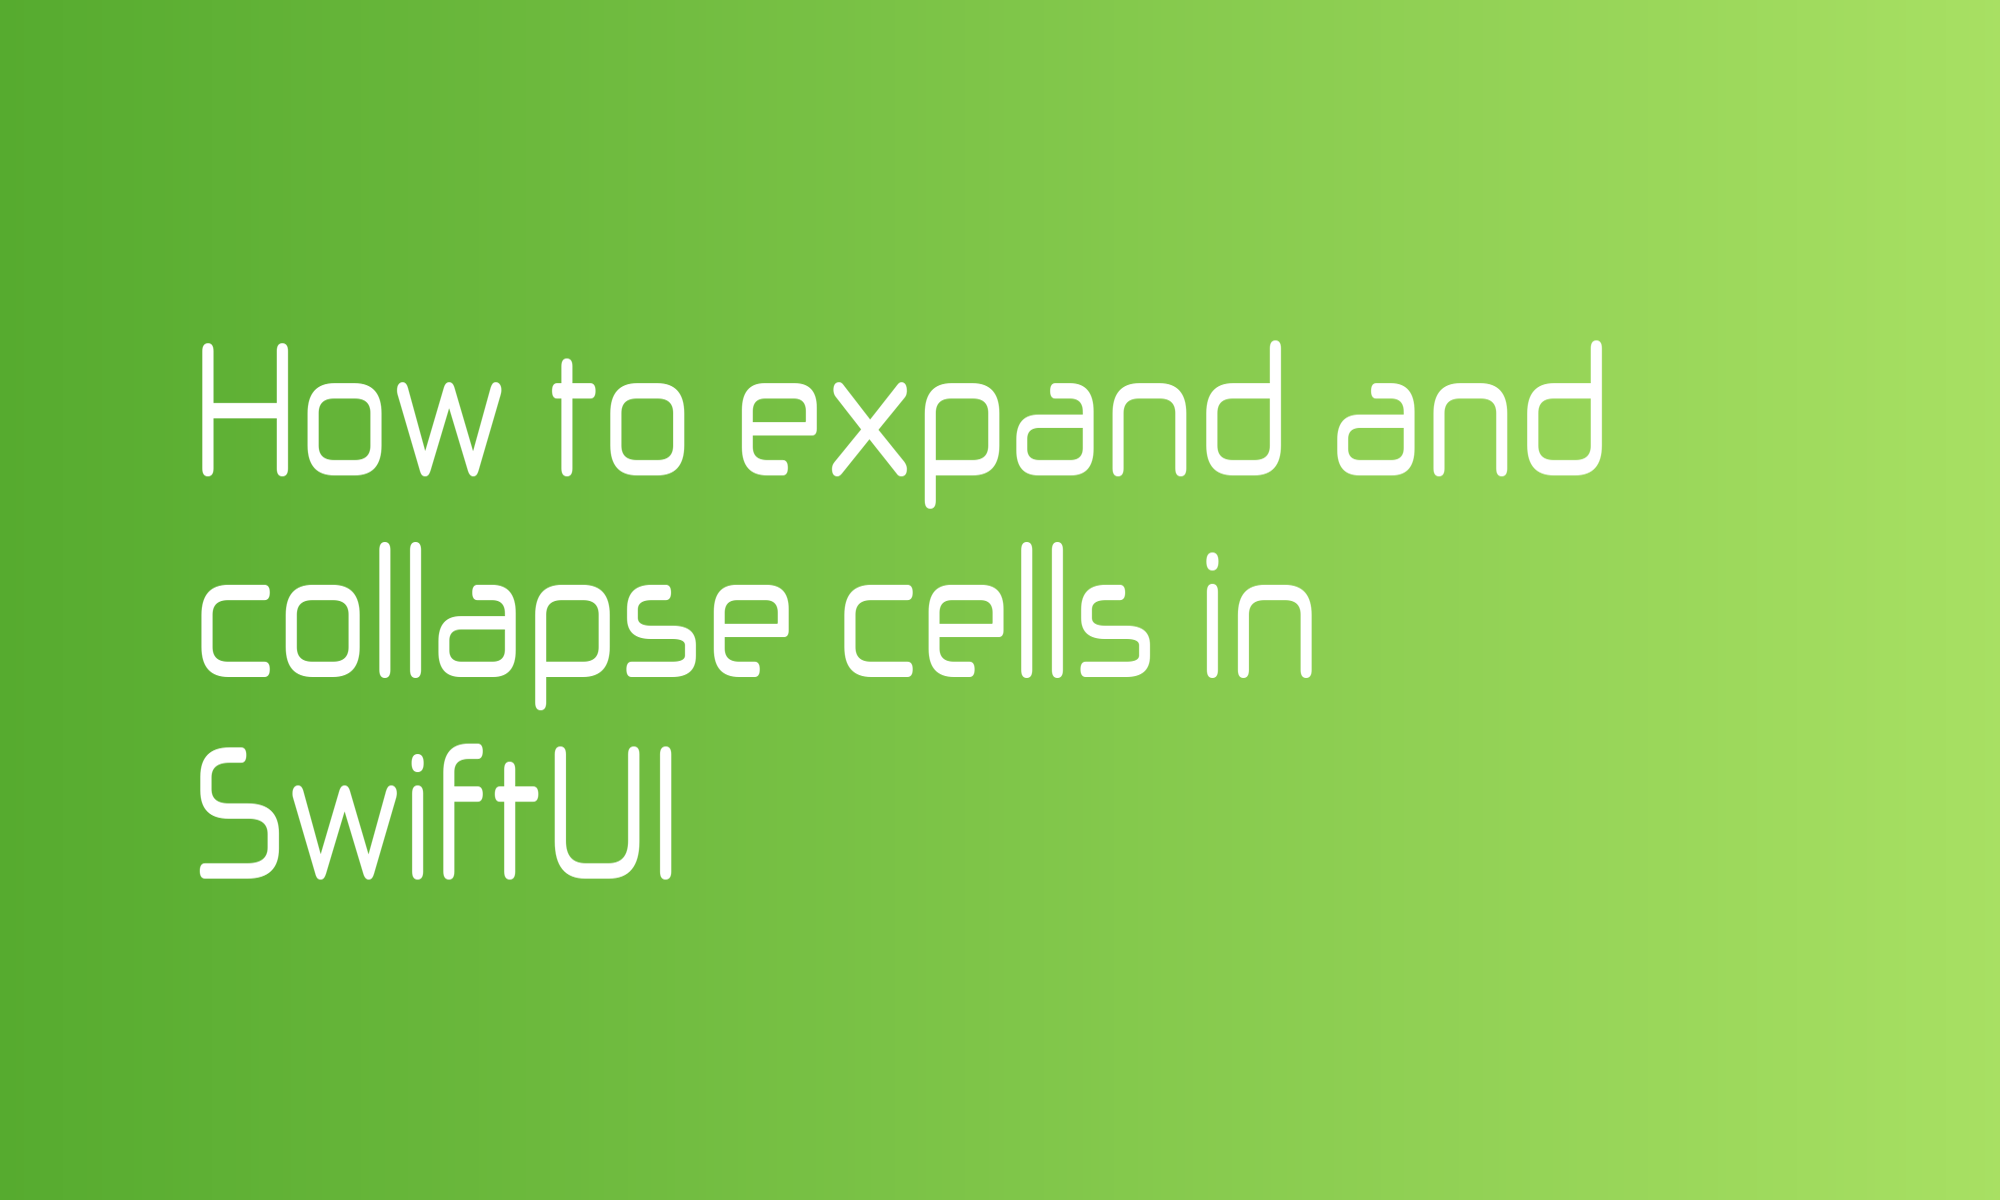 How to expand and collapse cells in SwiftUI